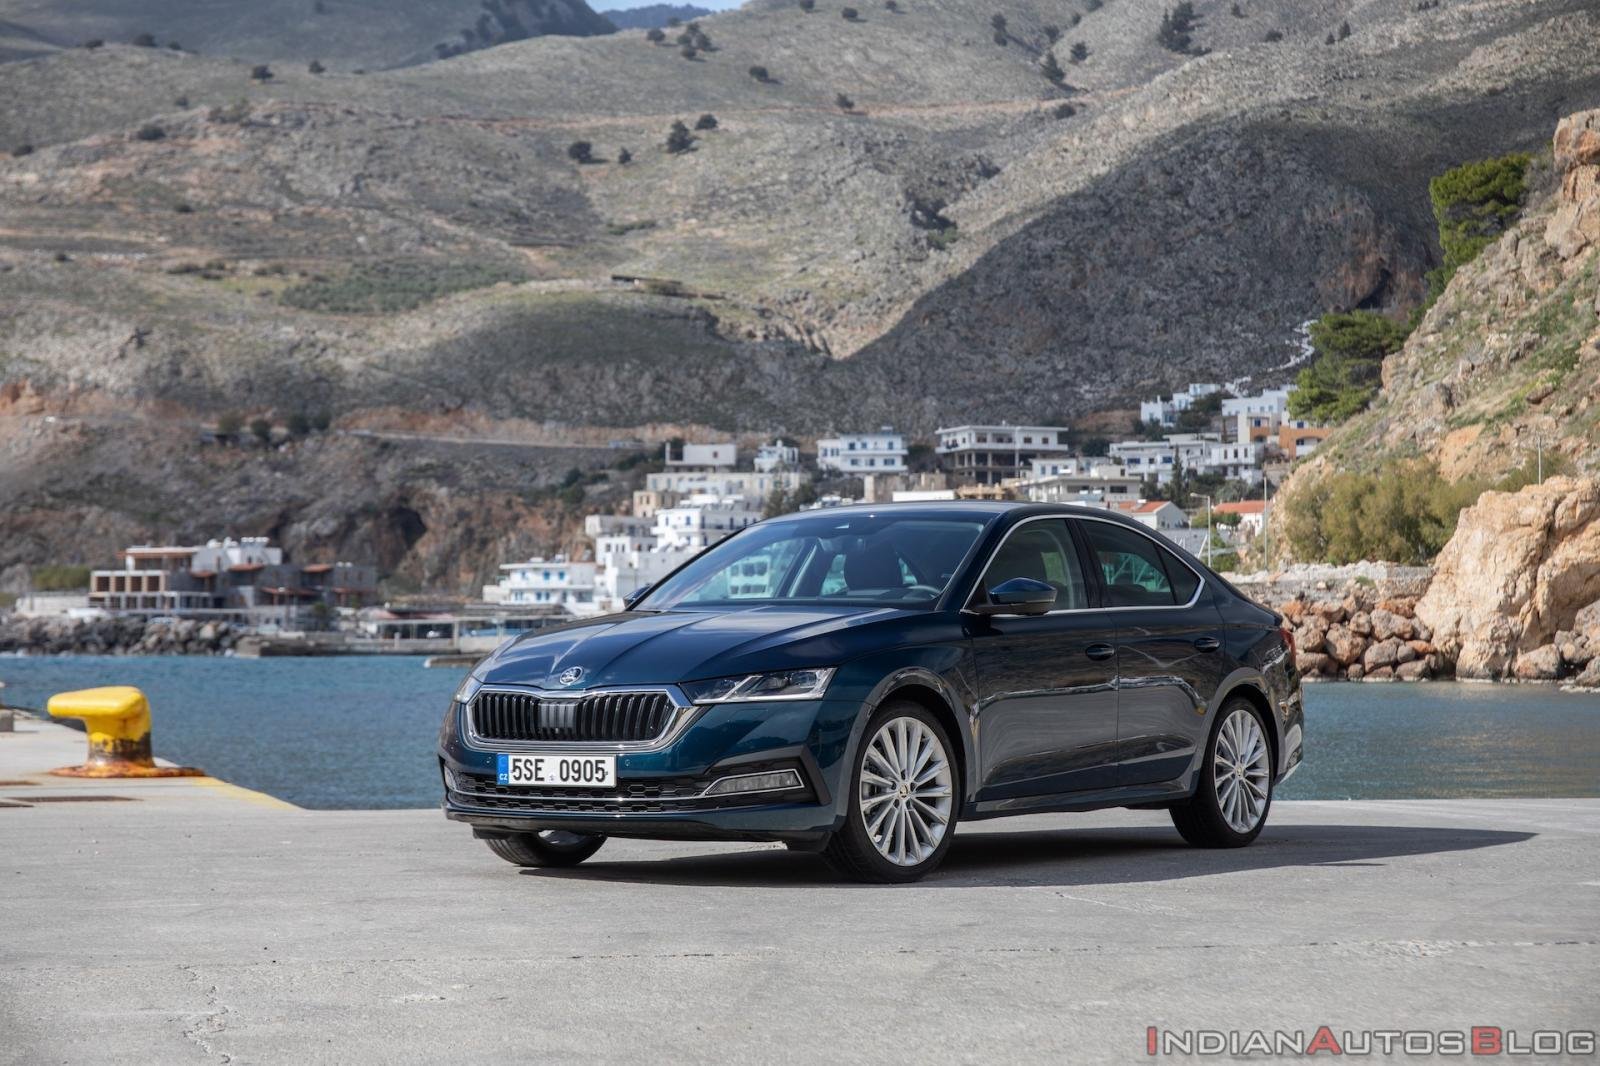 Fourth-Generation Skoda Octavia's Launch Postponed As Covid-19 Cases Rise